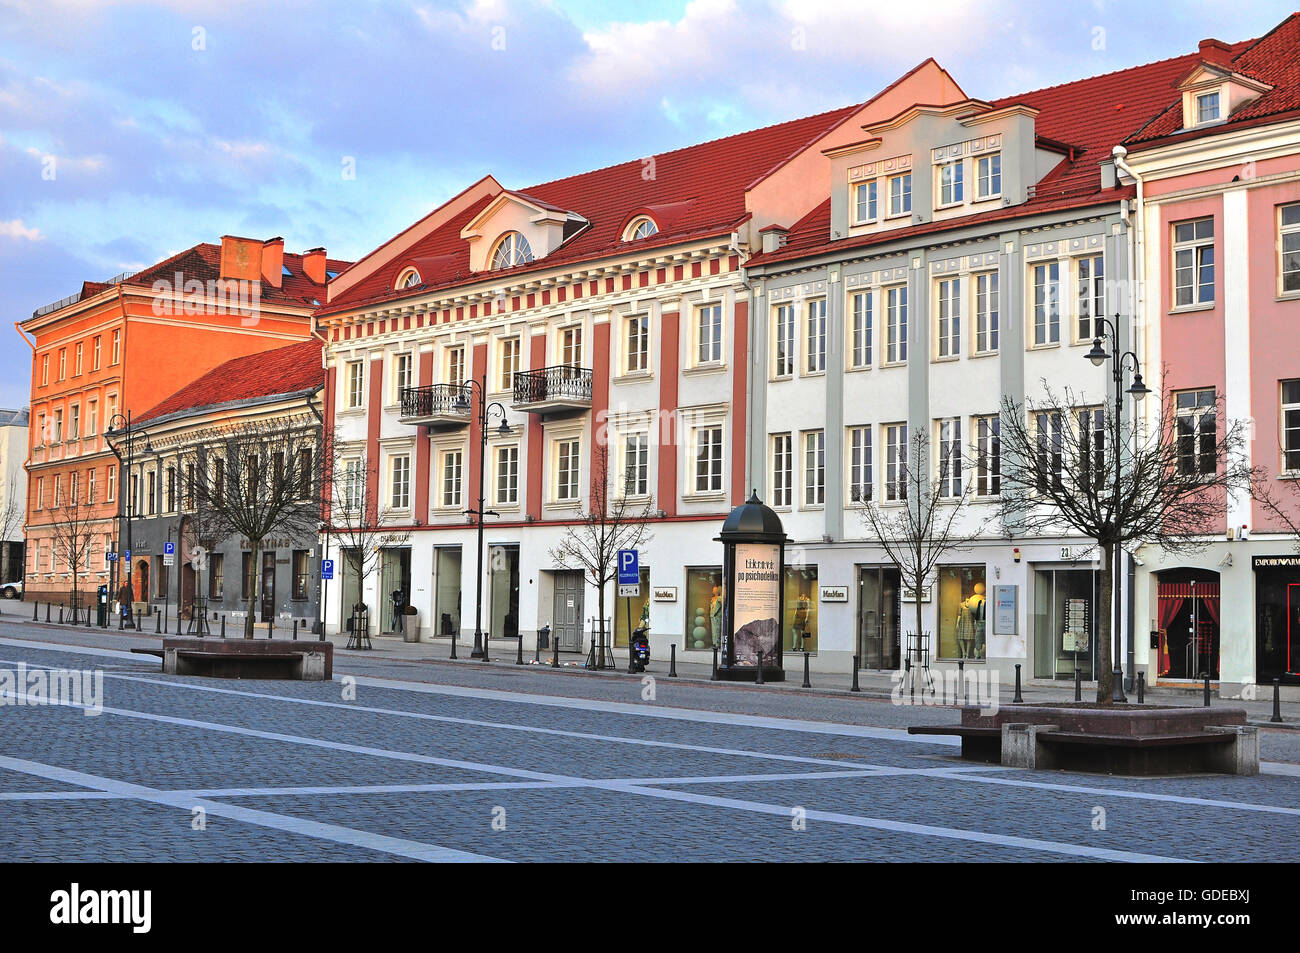 VILNIUS, LITHUANIA - APRIL 12: View of a street in Vilnius old town on April 12, 2015. Stock Photo